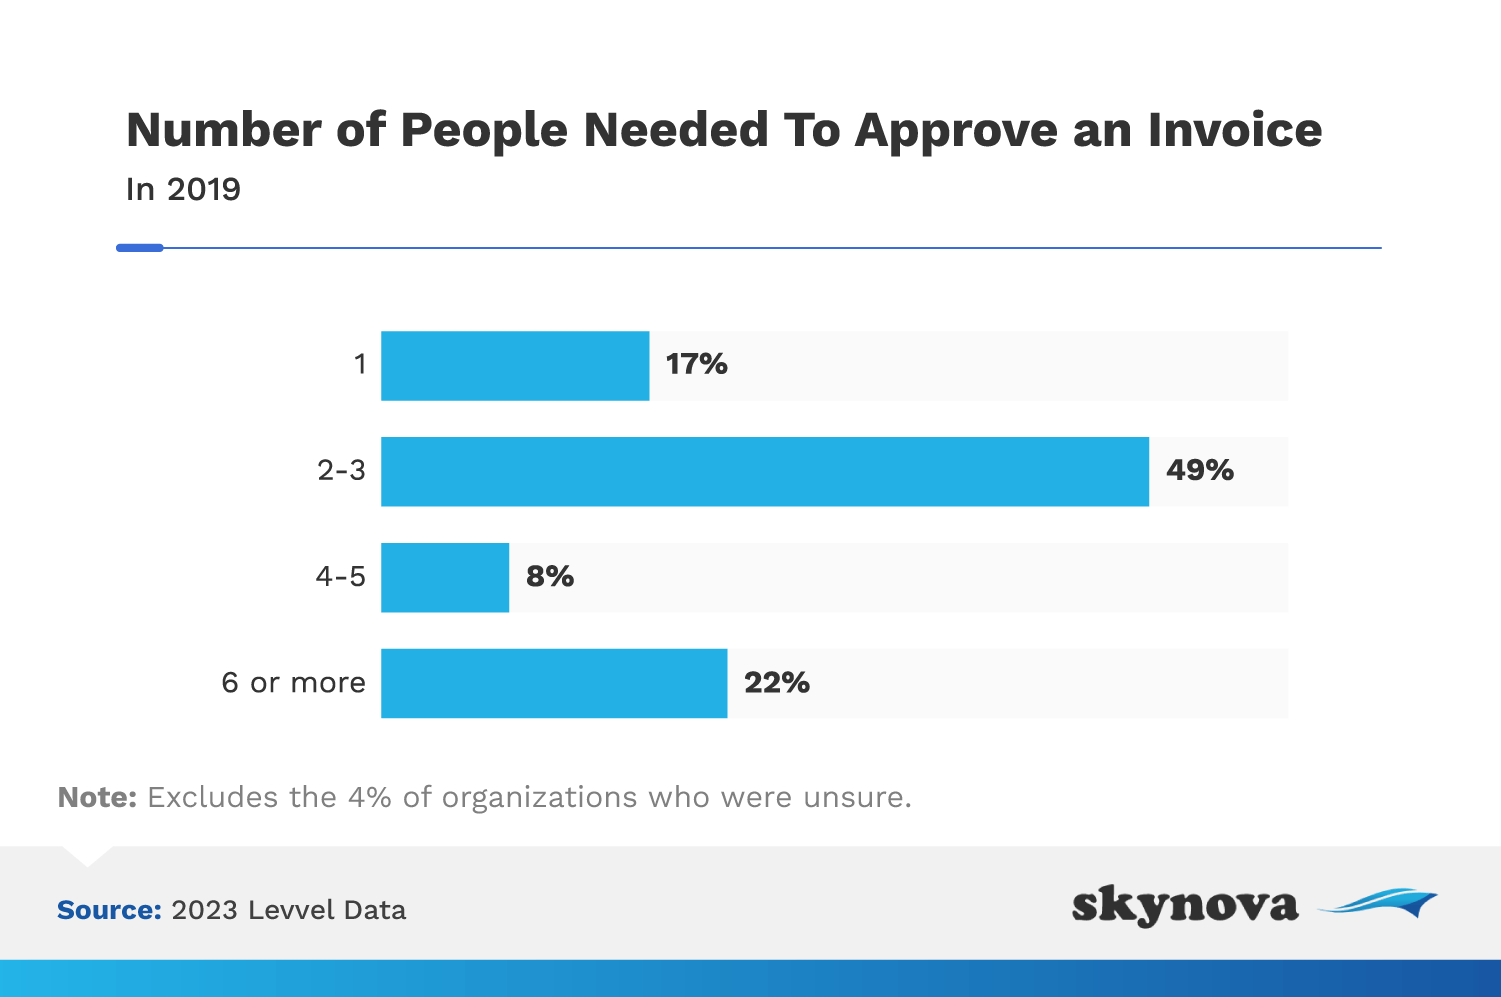 Number of people needed to approve an invoice